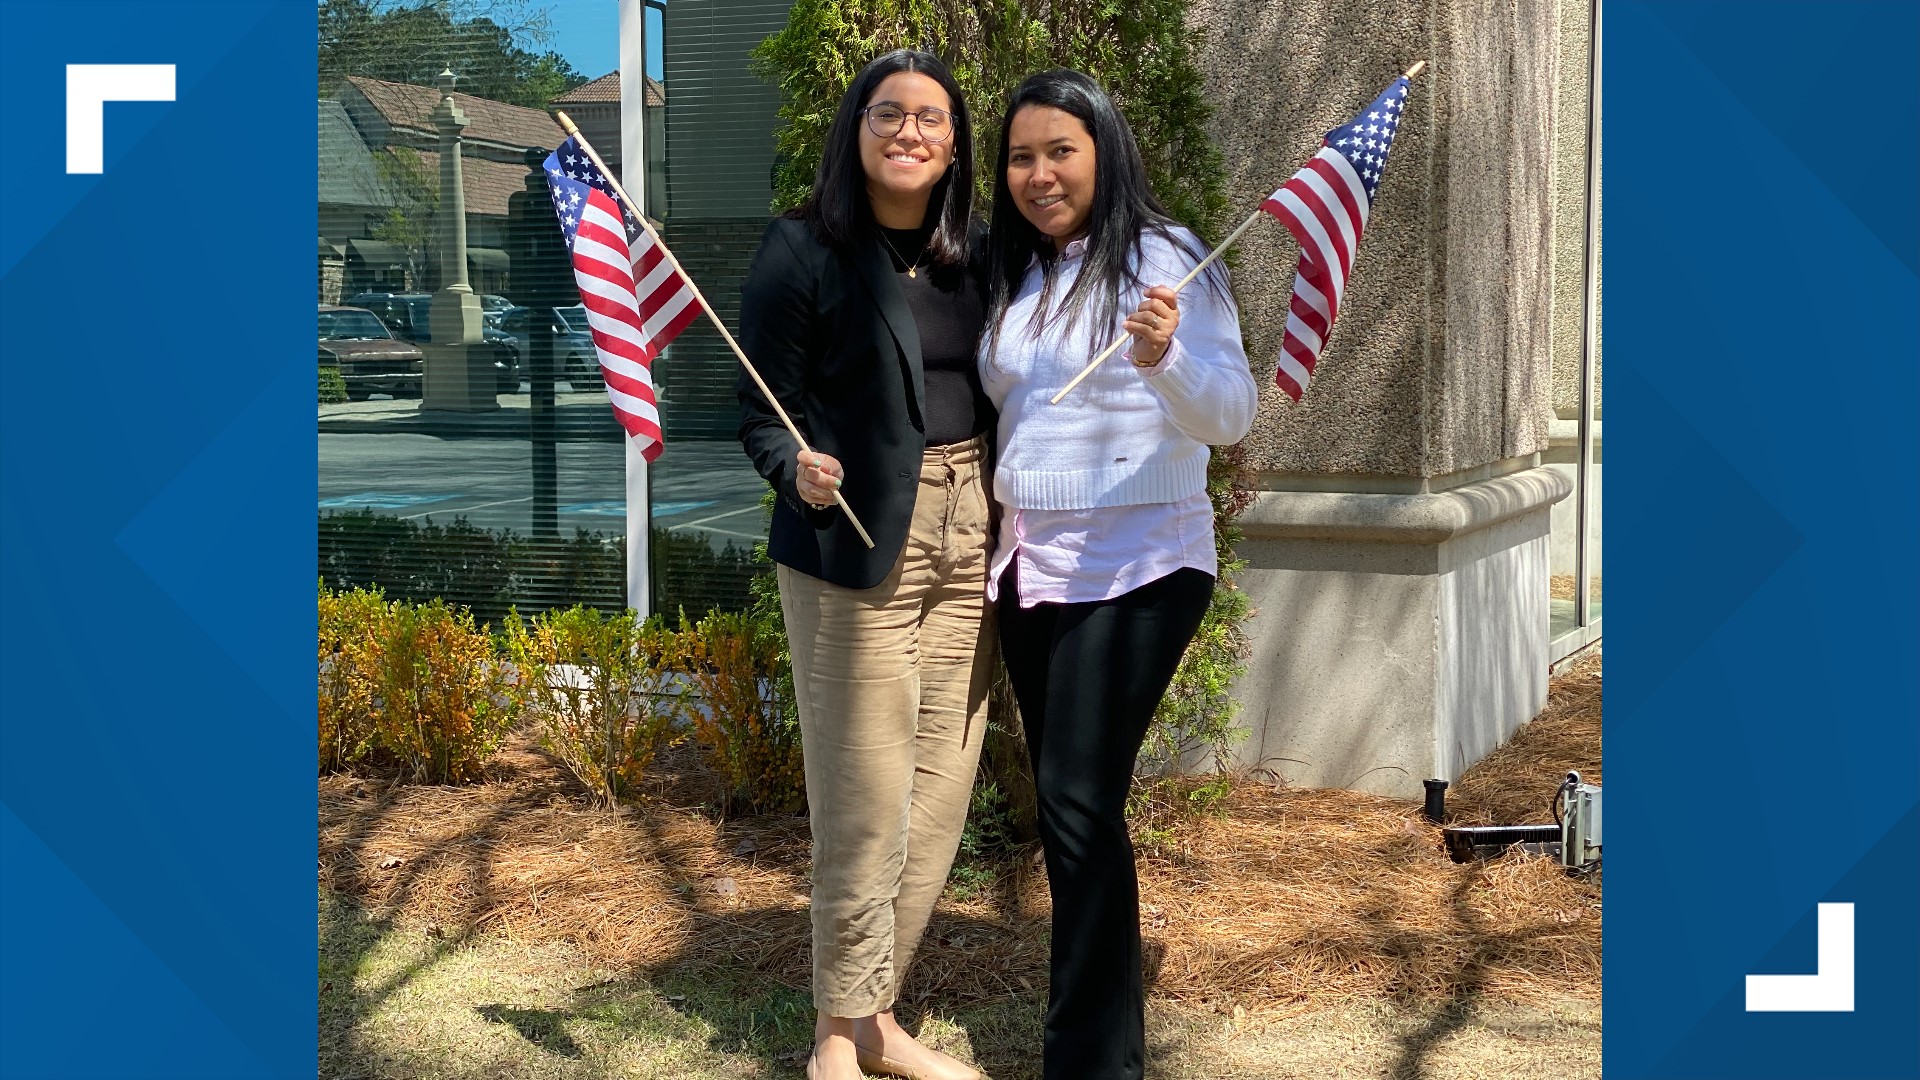 The National Partnership for New Americans (NPNA) released a report Tuesday revealing Georgia is now home to nearly 97,000 naturalized citizens since 2016.